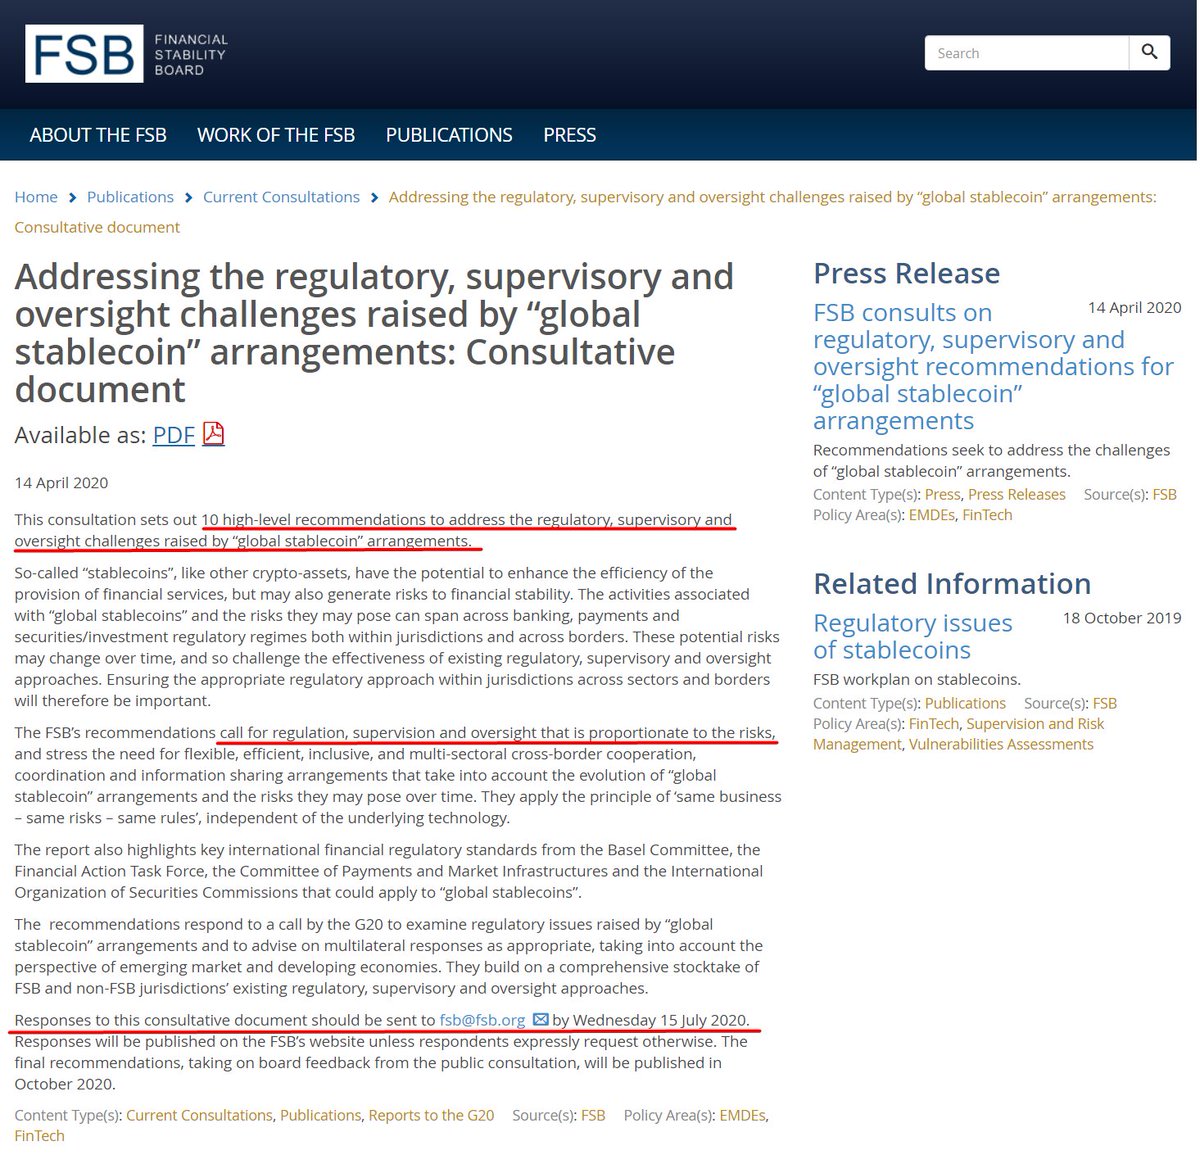 Stop thinking like sheep and start thinking for yourselfSubject: The consultative FSB report on global stablecoins (GSC's) that everyone claims "will ban stablecoins"It contains 10 high level recommendations calling for regulations, supervision and oversight1/